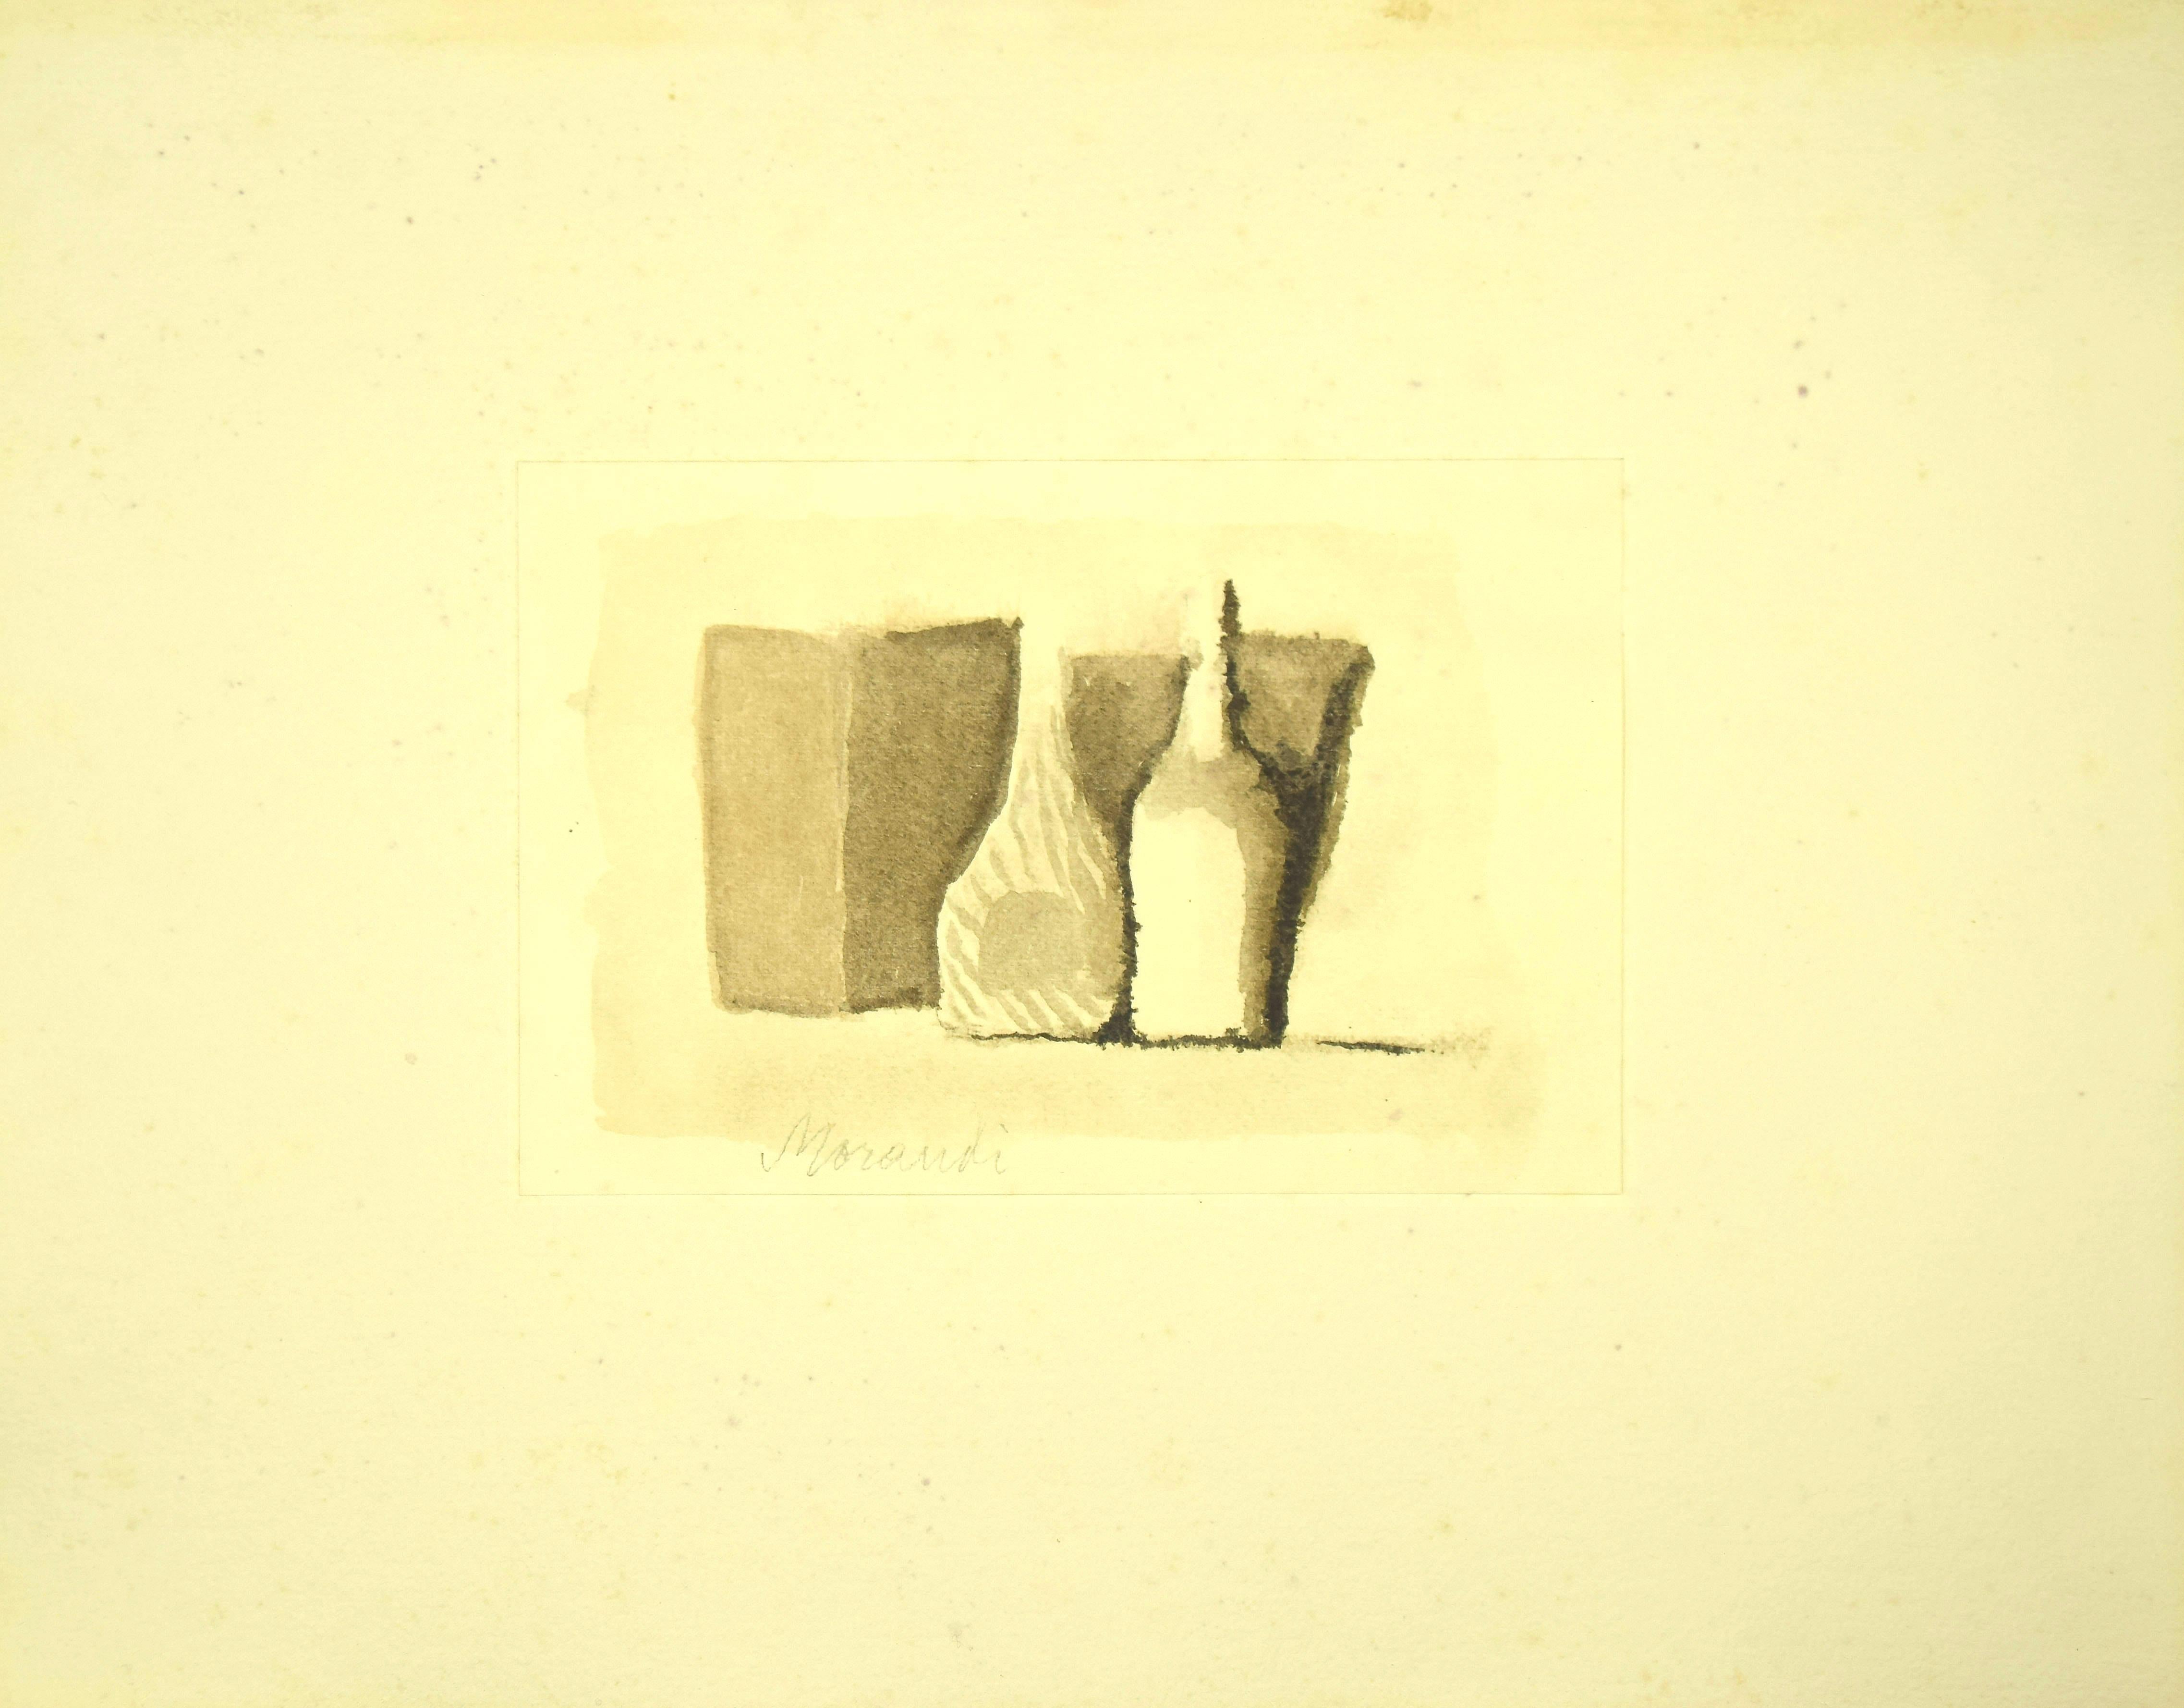 Still Life Composition is an original offset print, reproducing the original watercolor by Giorgio Morandi.

Signature by the artist is perfectly reproduced on plate. Image Dimensions: 16 x 23.7 cm

From the volume "L'Opera grafica di Giorgio